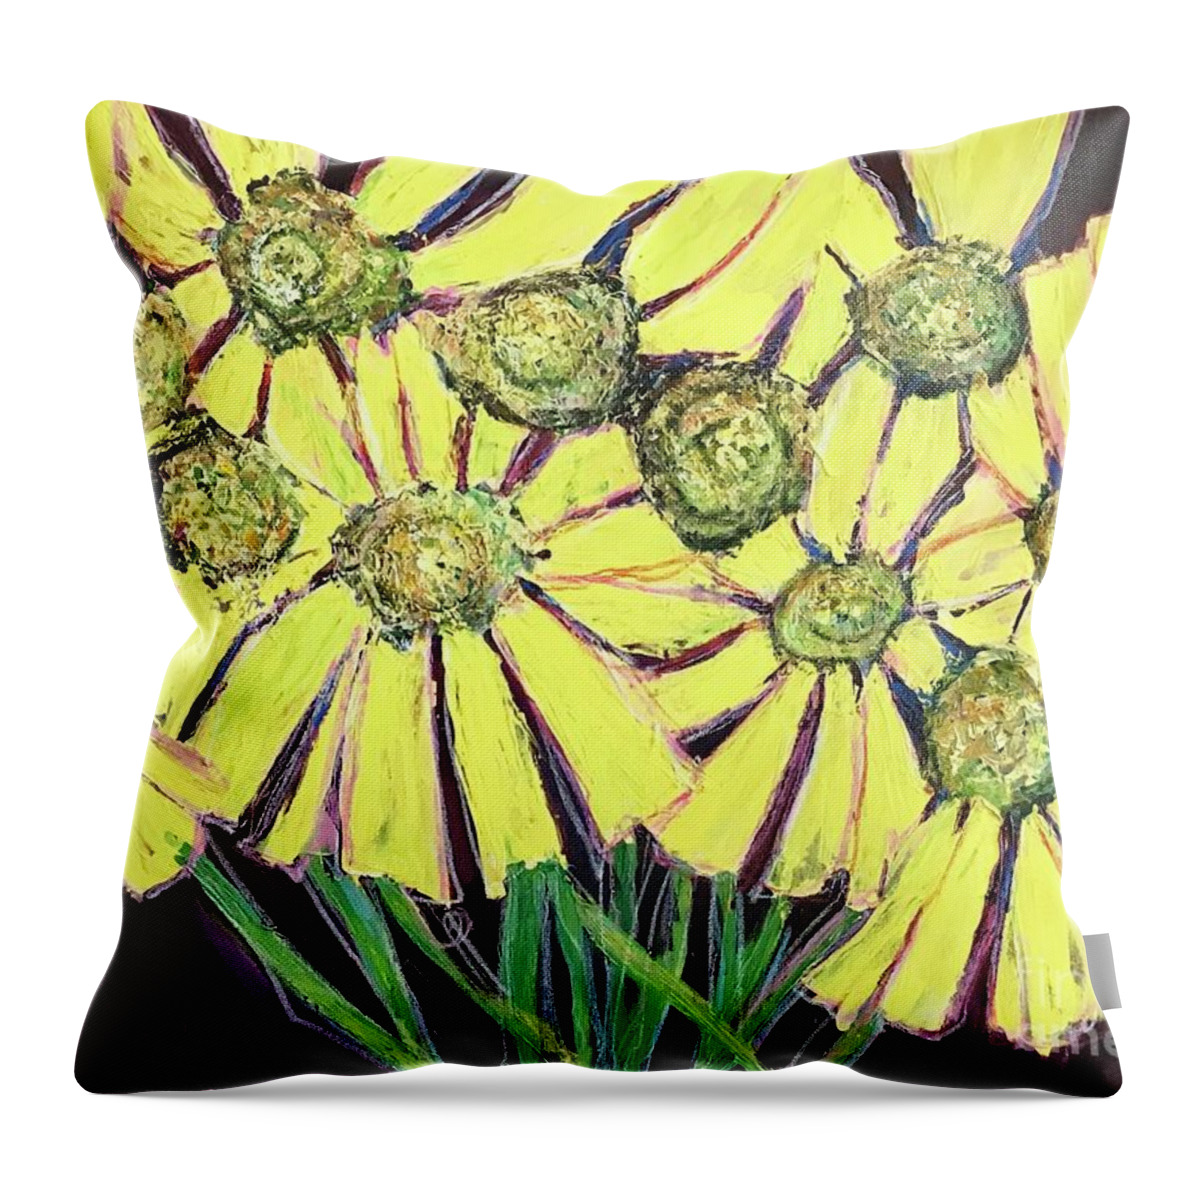 Floral Throw Pillow featuring the painting Peepers Peepers by Sherry Harradence